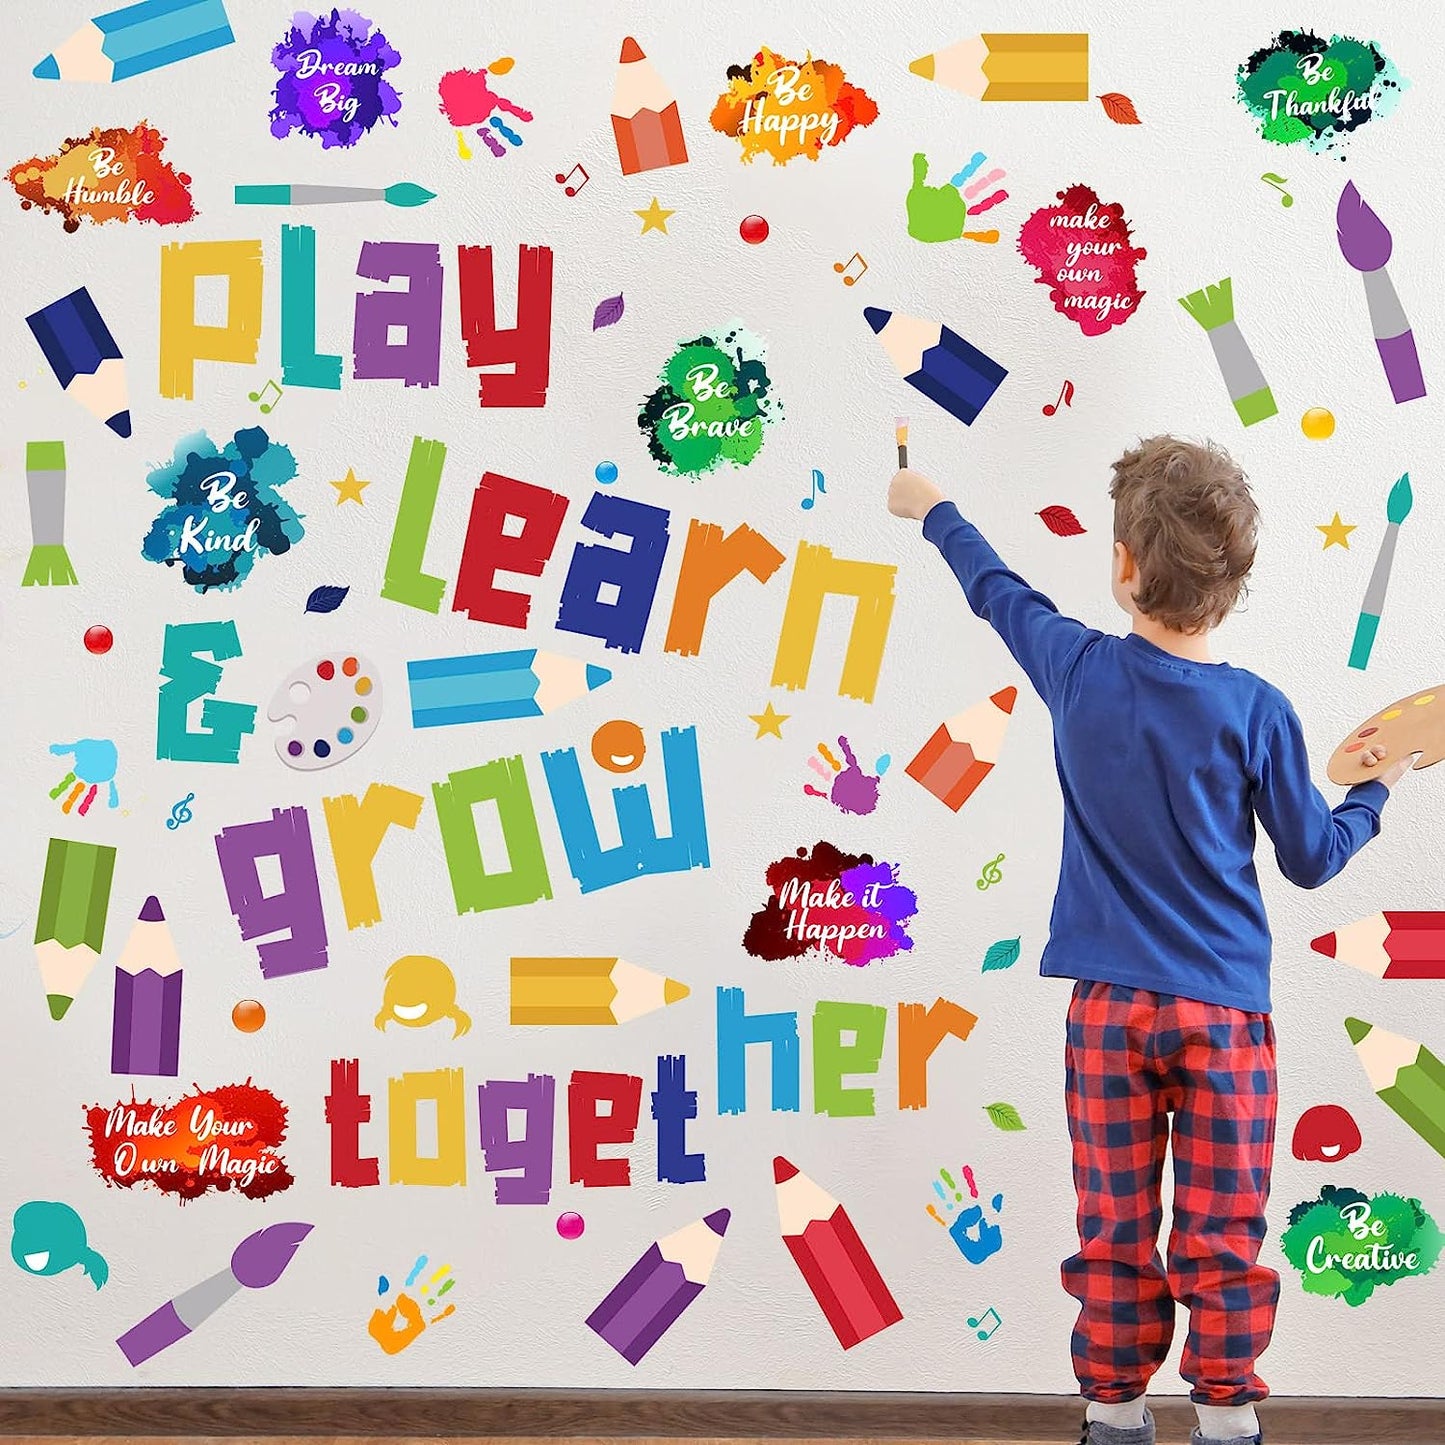 Kids Wall Decals Classroom Decals Colorful Inspirational Wall Decals Daycare Decals Playroom Wall Decor Motivational Wall Decals Positive Saying Sticker Splatter Wall Sticker（Play, Learn）